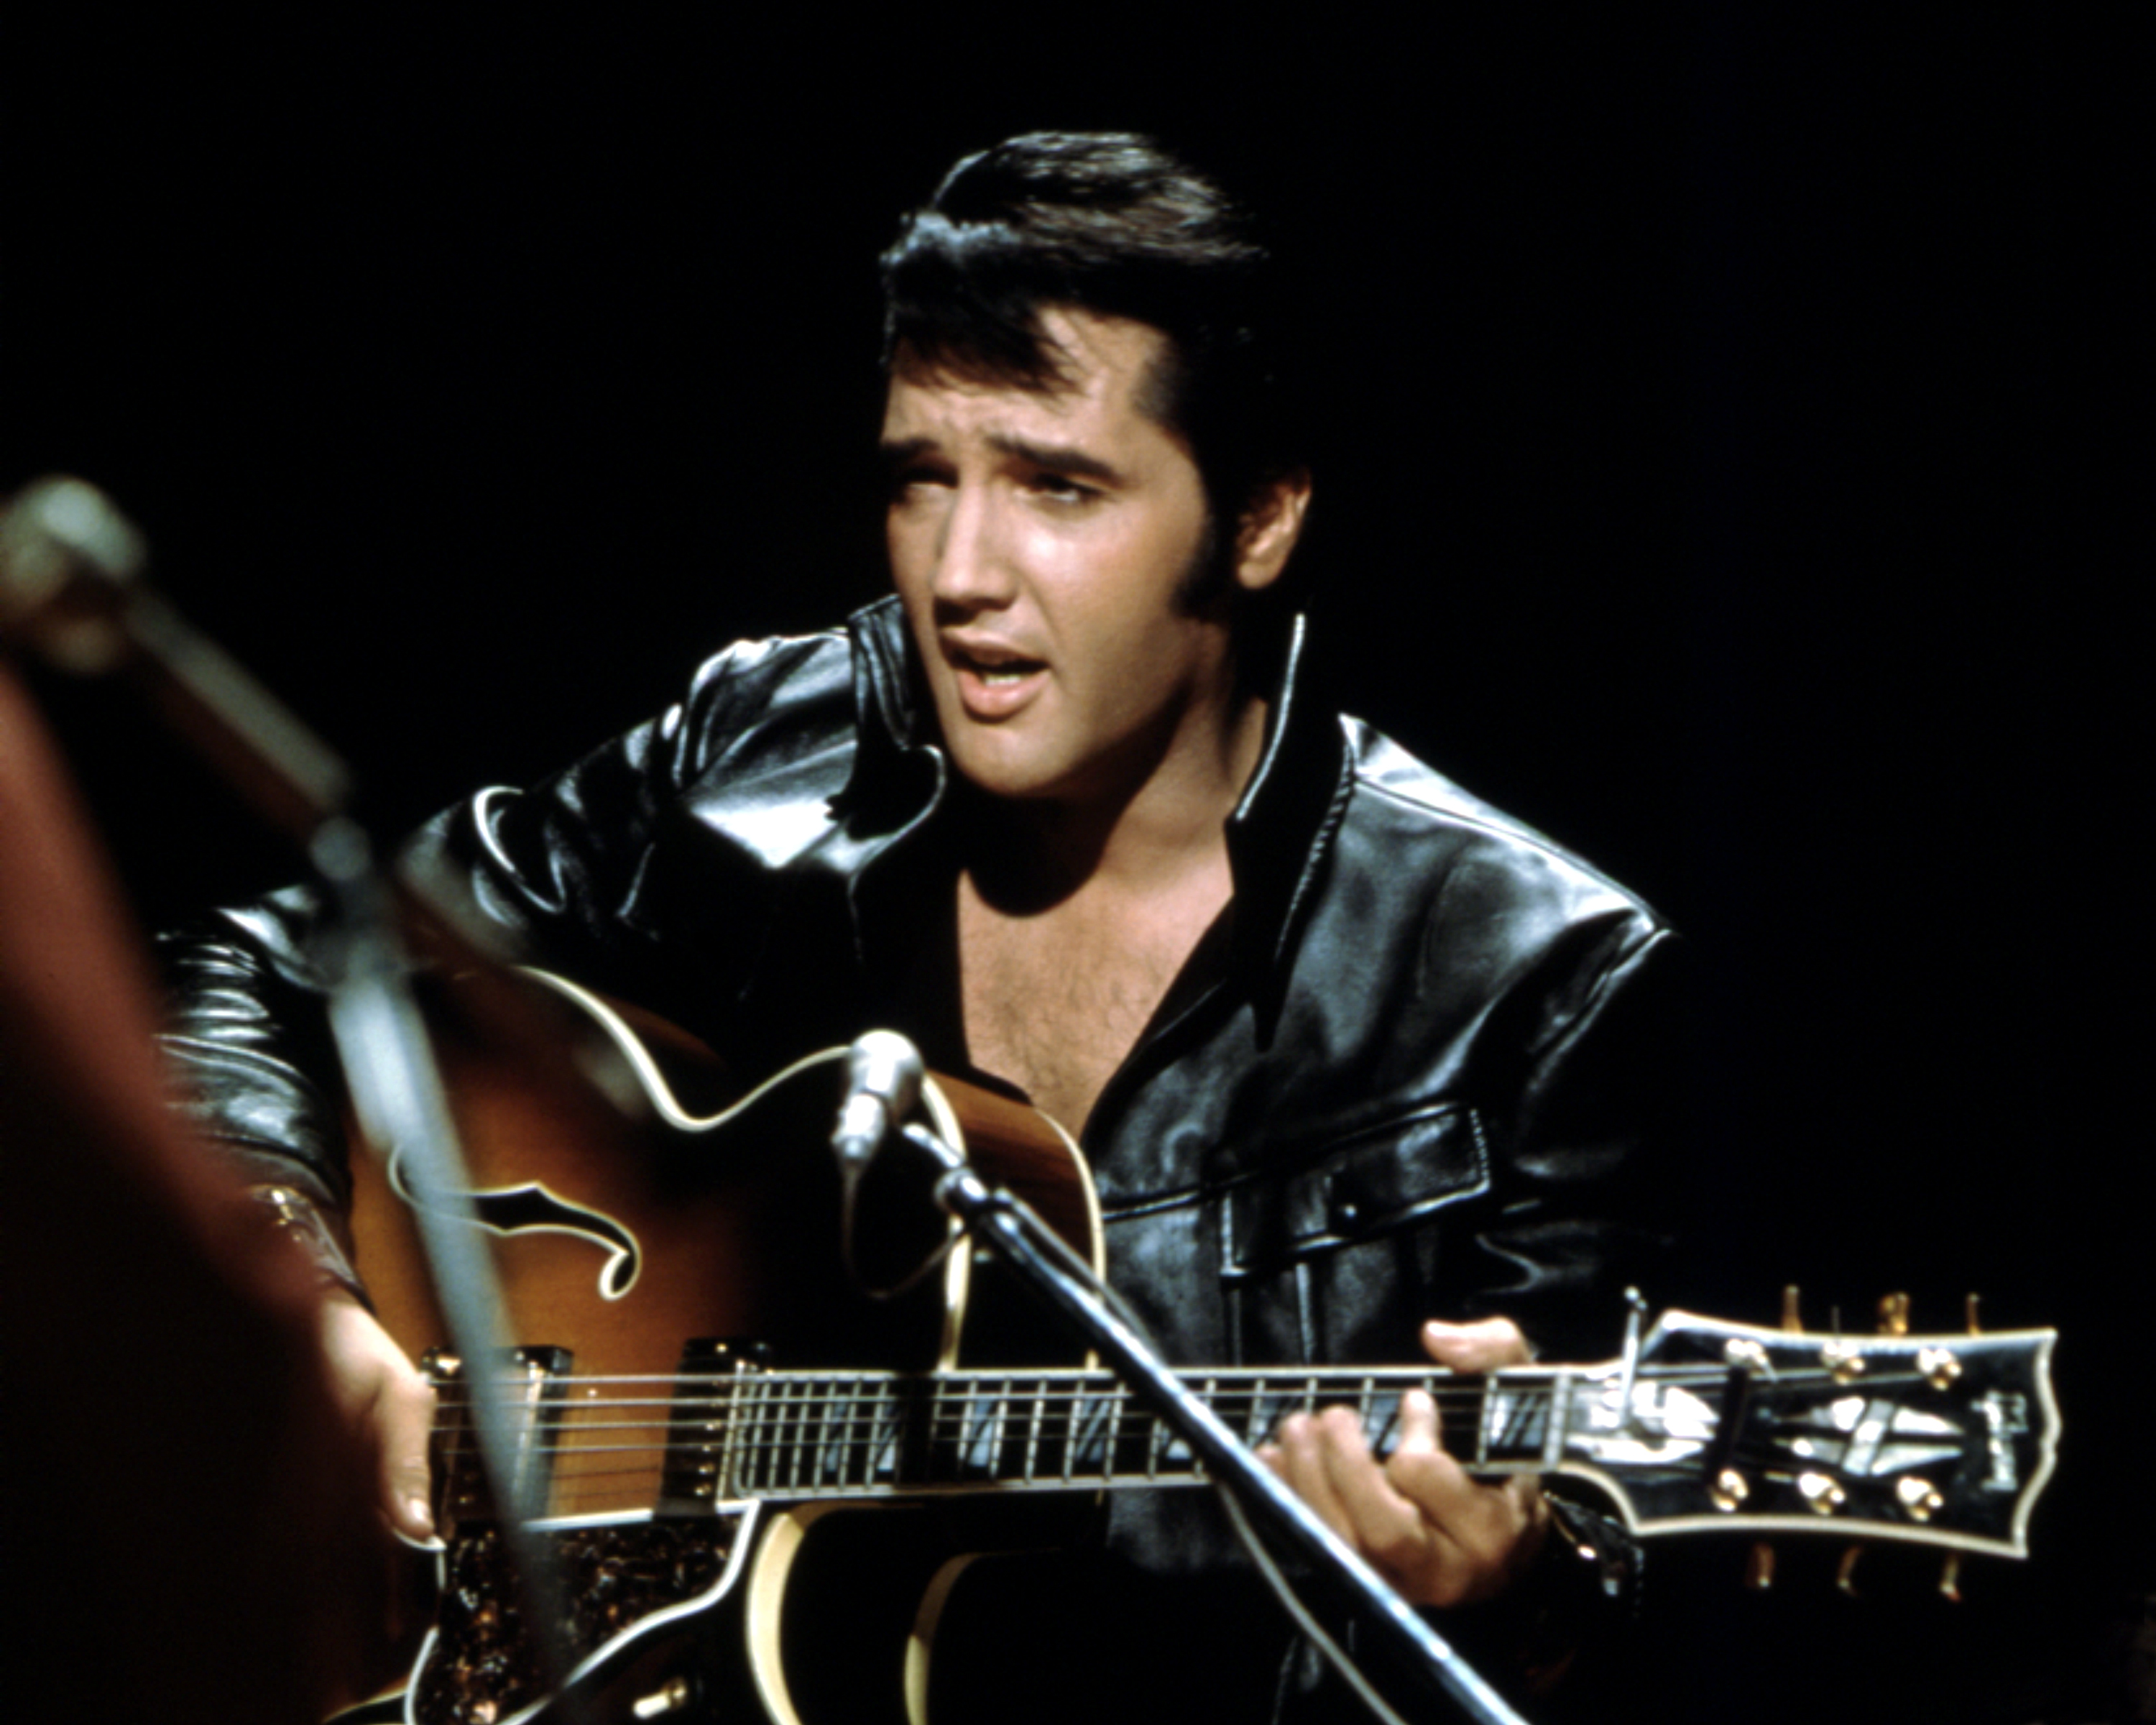 <p>Elvis Presley’s career was, unthinkably, bottoming out when he appeared on this hour-long NBC TV special, decked out in a black leather jumpsuit to revisit some of his biggest hits and introduce some hard-rocking new numbers (and two new ballads). Alternating between in-the-round acoustic performances with Scotty Moore and D.J. Fontana, from his original band, and orchestral arrangements, Elvis reclaimed the energy and sexiness that had eluded him for more than a decade.</p><p><a href='https://www.msn.com/en-us/community/channel/vid-cj9pqbr0vn9in2b6ddcd8sfgpfq6x6utp44fssrv6mc2gtybw0us'>Follow us on MSN to see more of our exclusive entertainment content.</a></p>